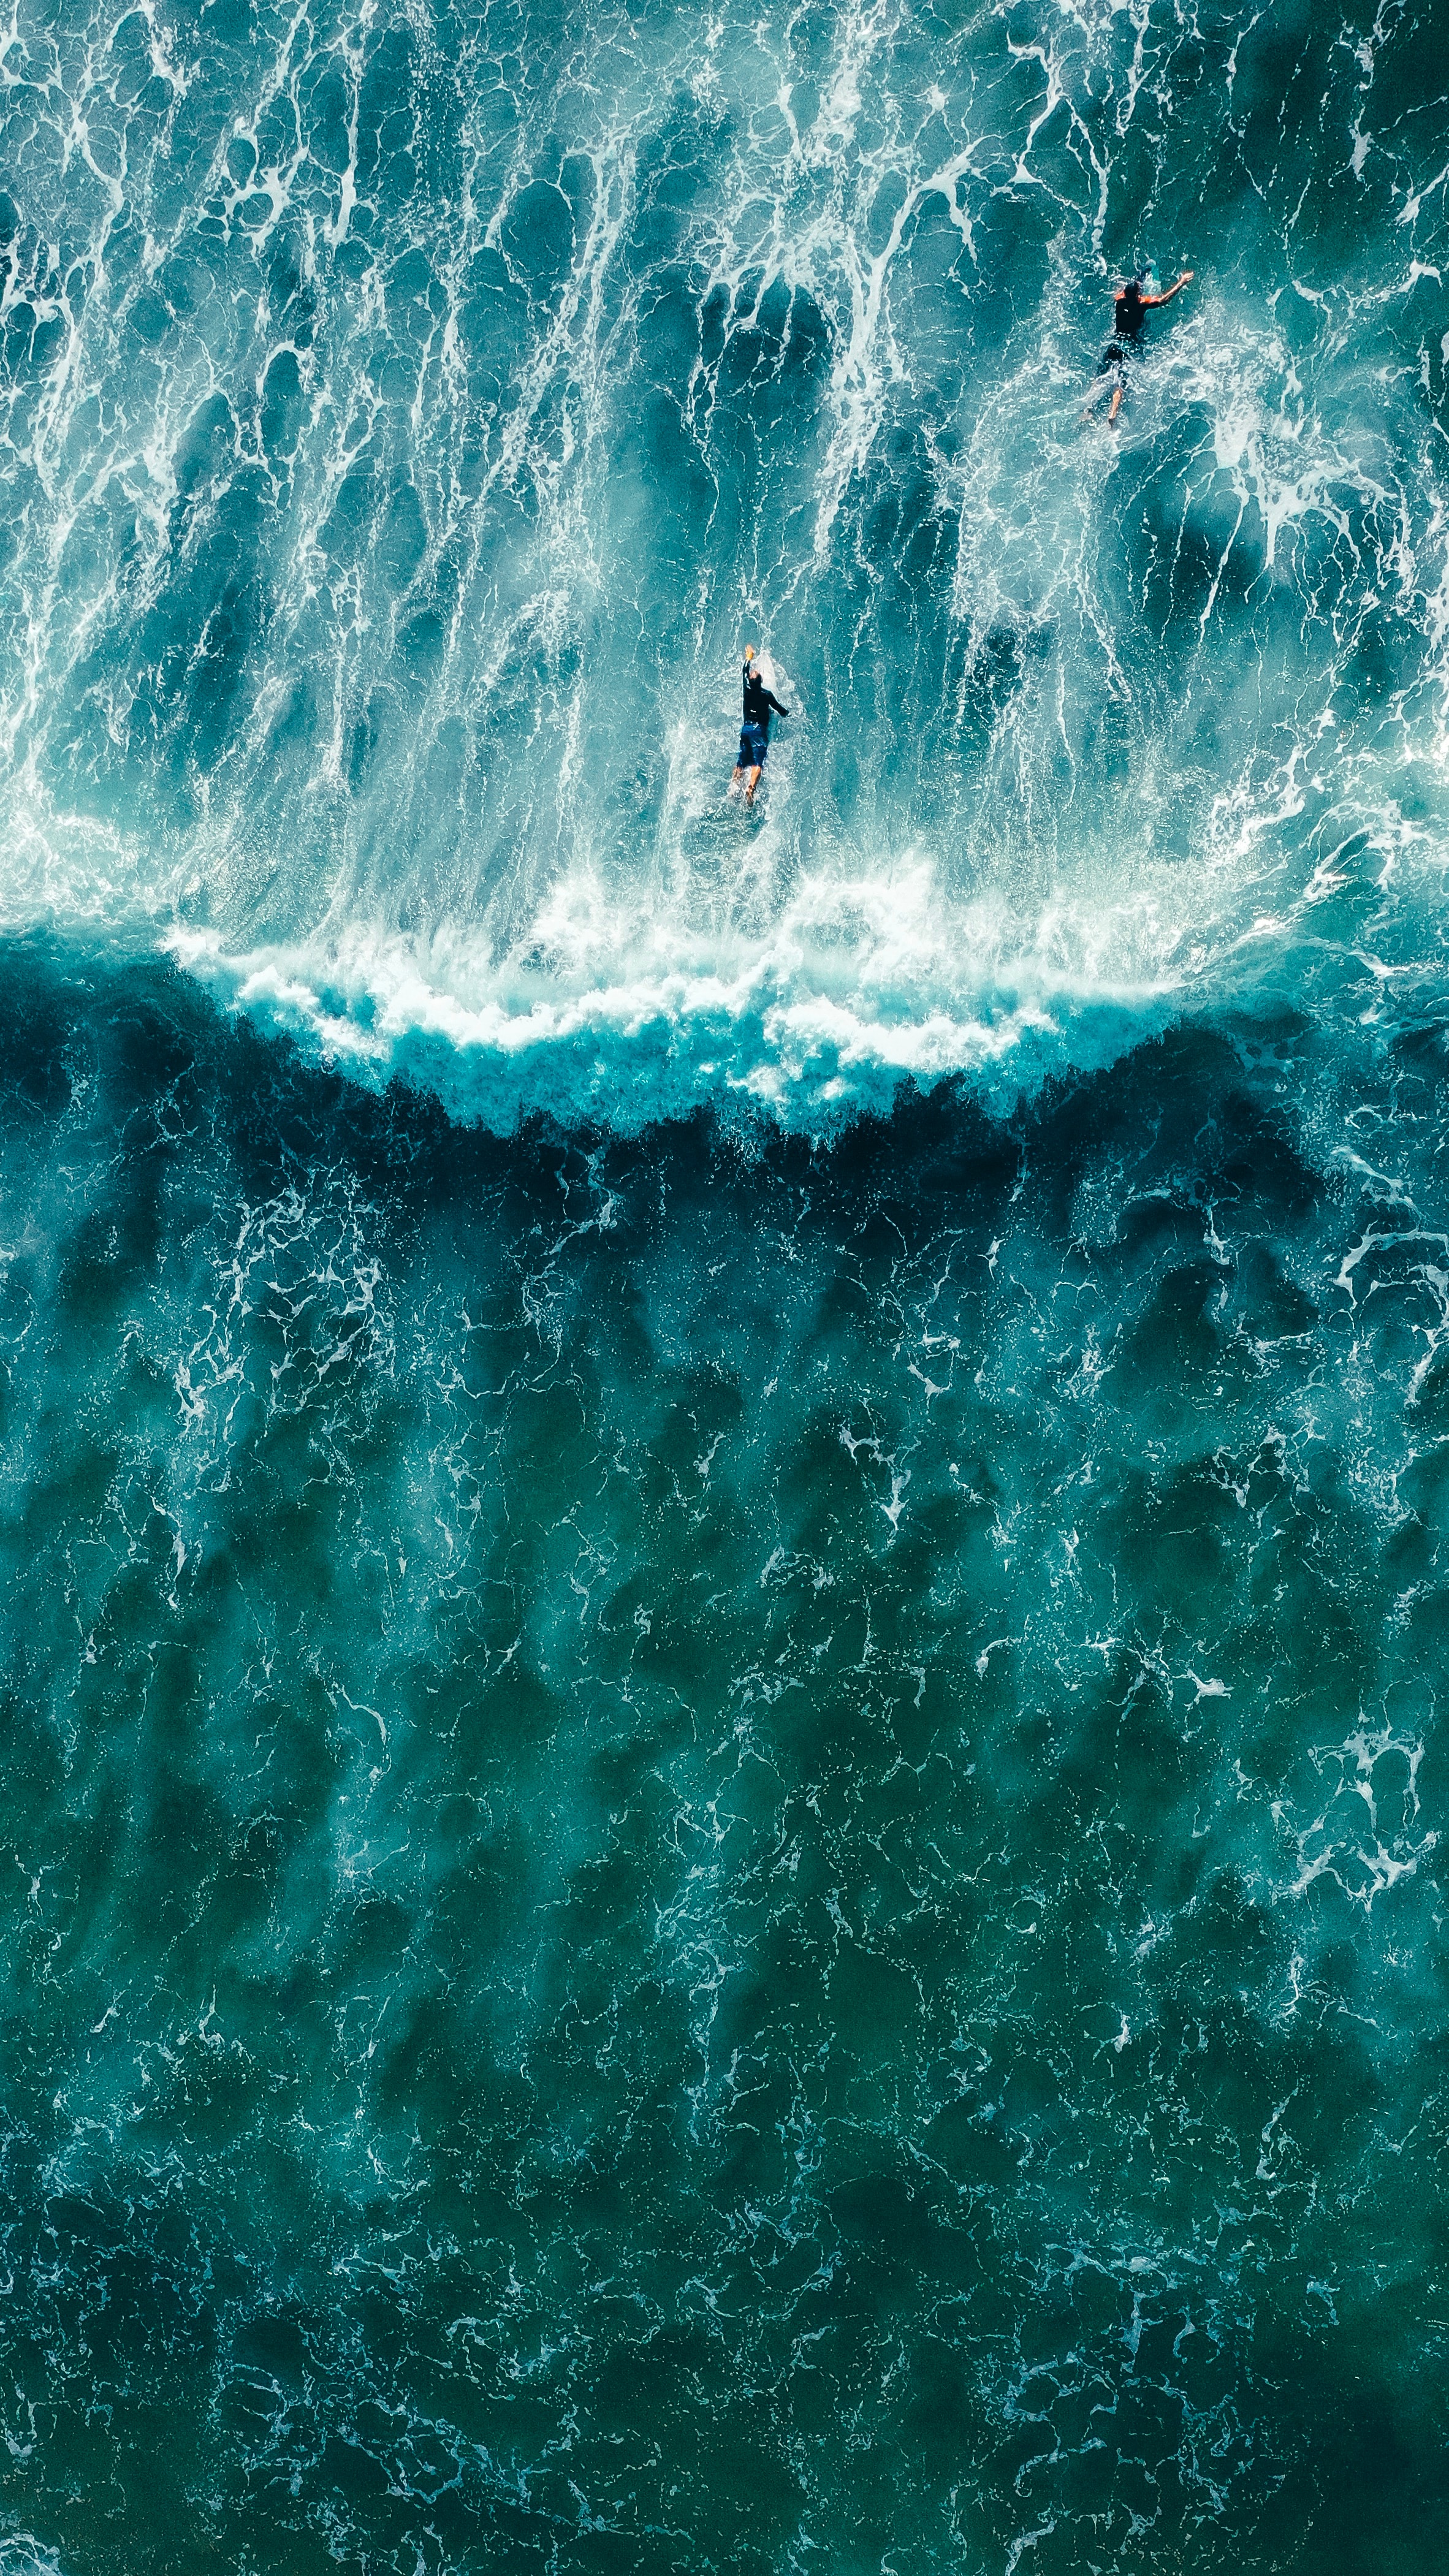 sports, waves, serfing, view from above, ocean, surfers